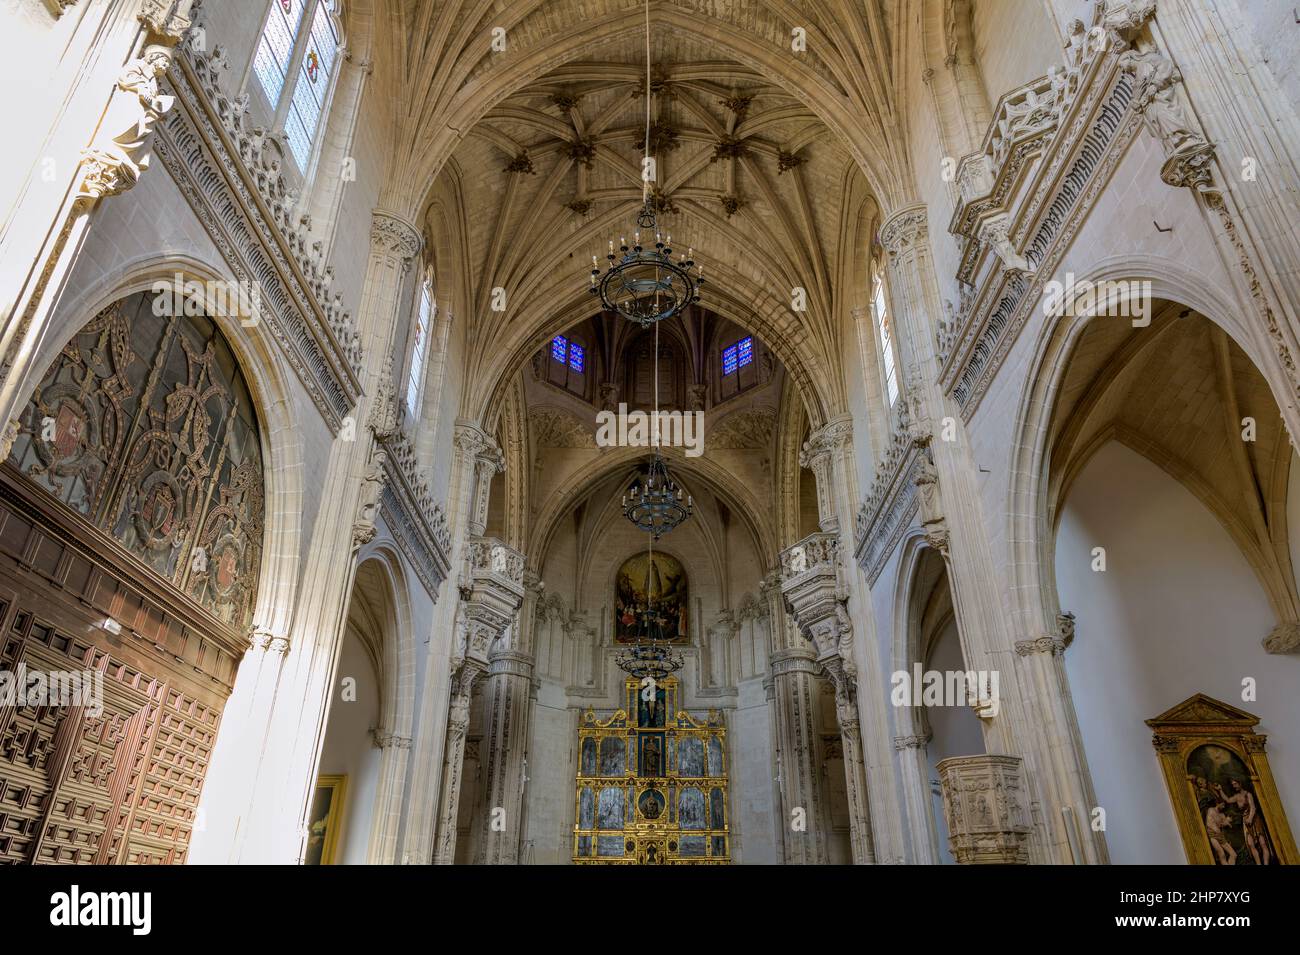 Old Chapel - Wide-angle and low-angle view of bright evening sunlight shining in main chapel of Monastery of San Juan de los Reyes, Toledo, Spain. Stock Photo